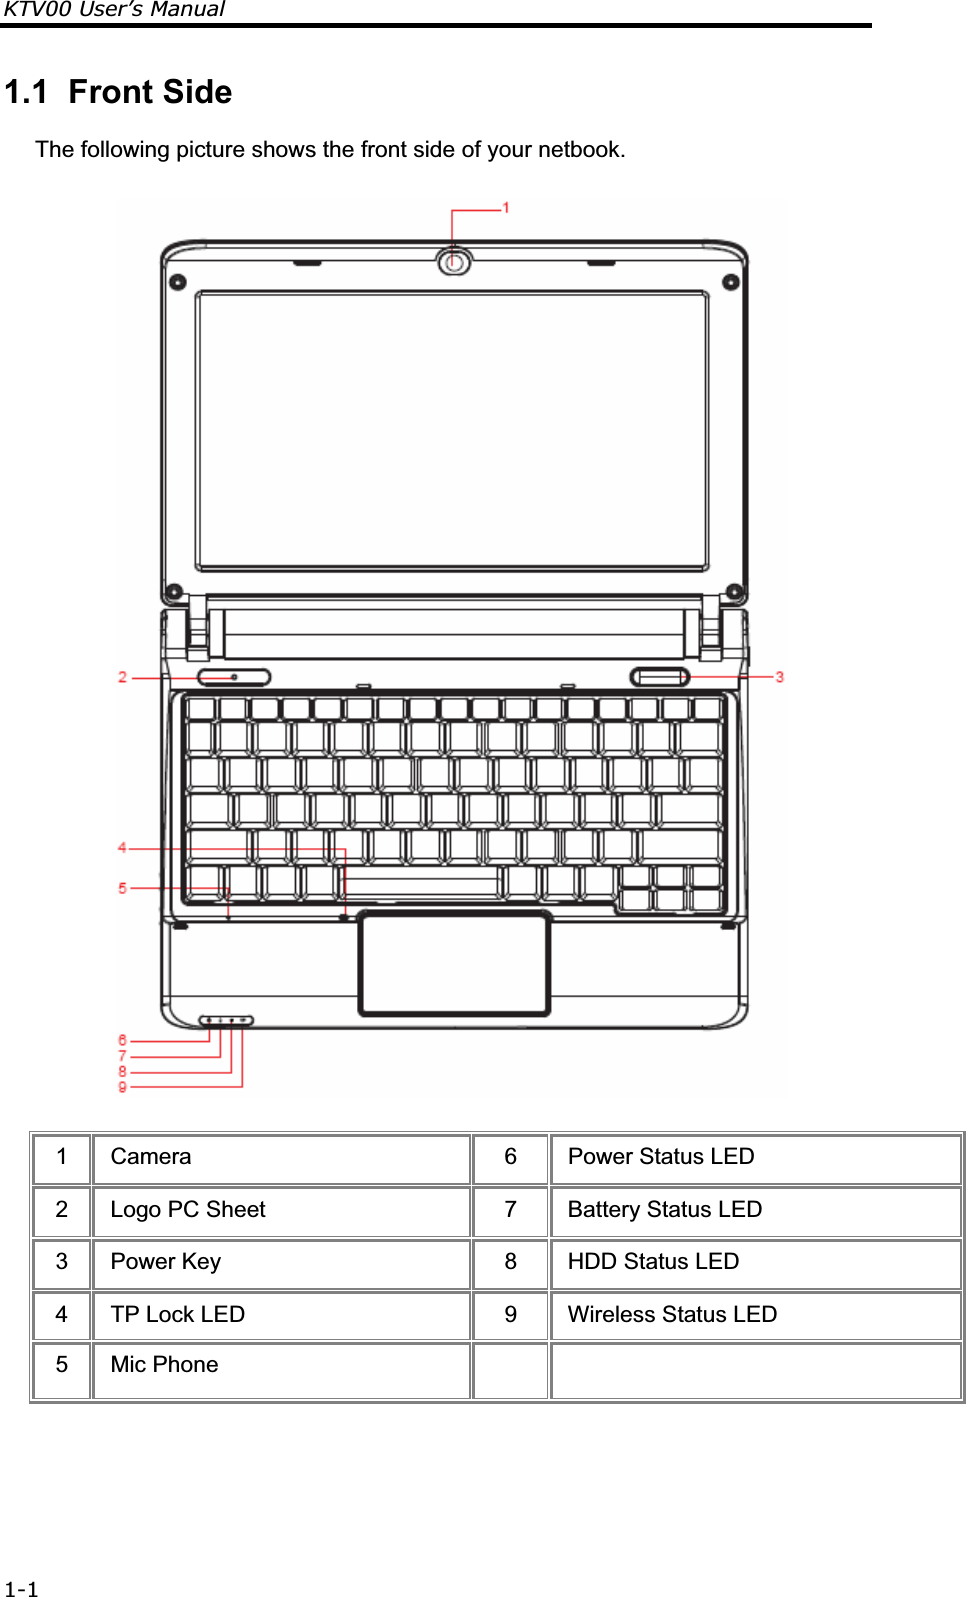 KTV00 User’s Manual 1-11.1  Front Side The following picture shows the front side of your netbook.  1  Camera  6  Power Status LED 2  Logo PC Sheet  7  Battery Status LED 3  Power Key  8  HDD Status LED 4  TP Lock LED  9  Wireless Status LED 5 Mic Phone     